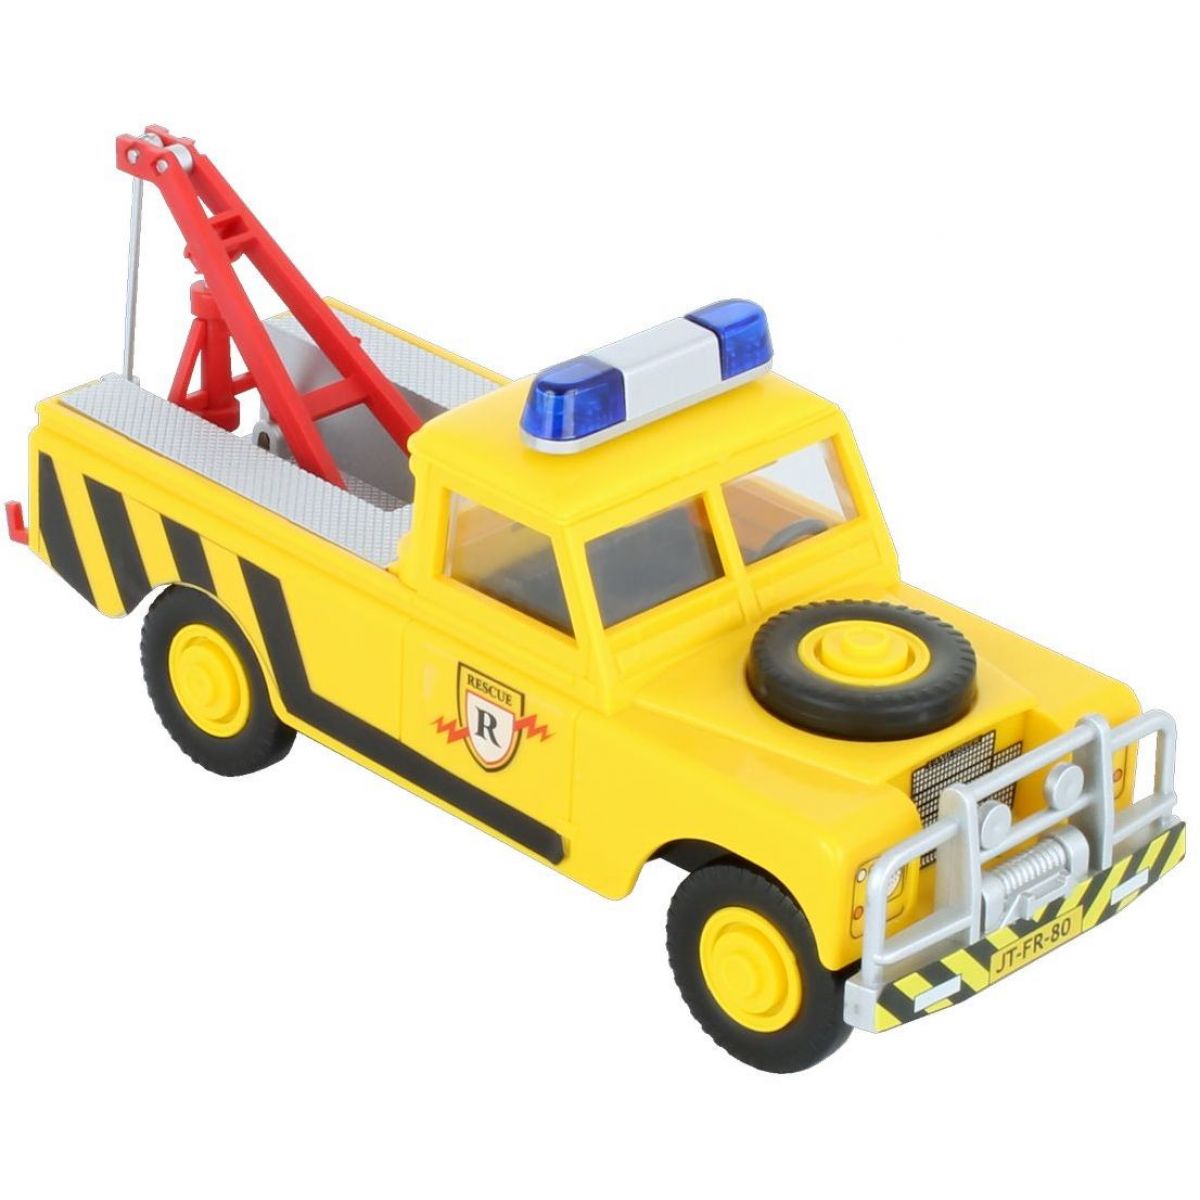 Monti System MS 56 Tow Truck 1:35